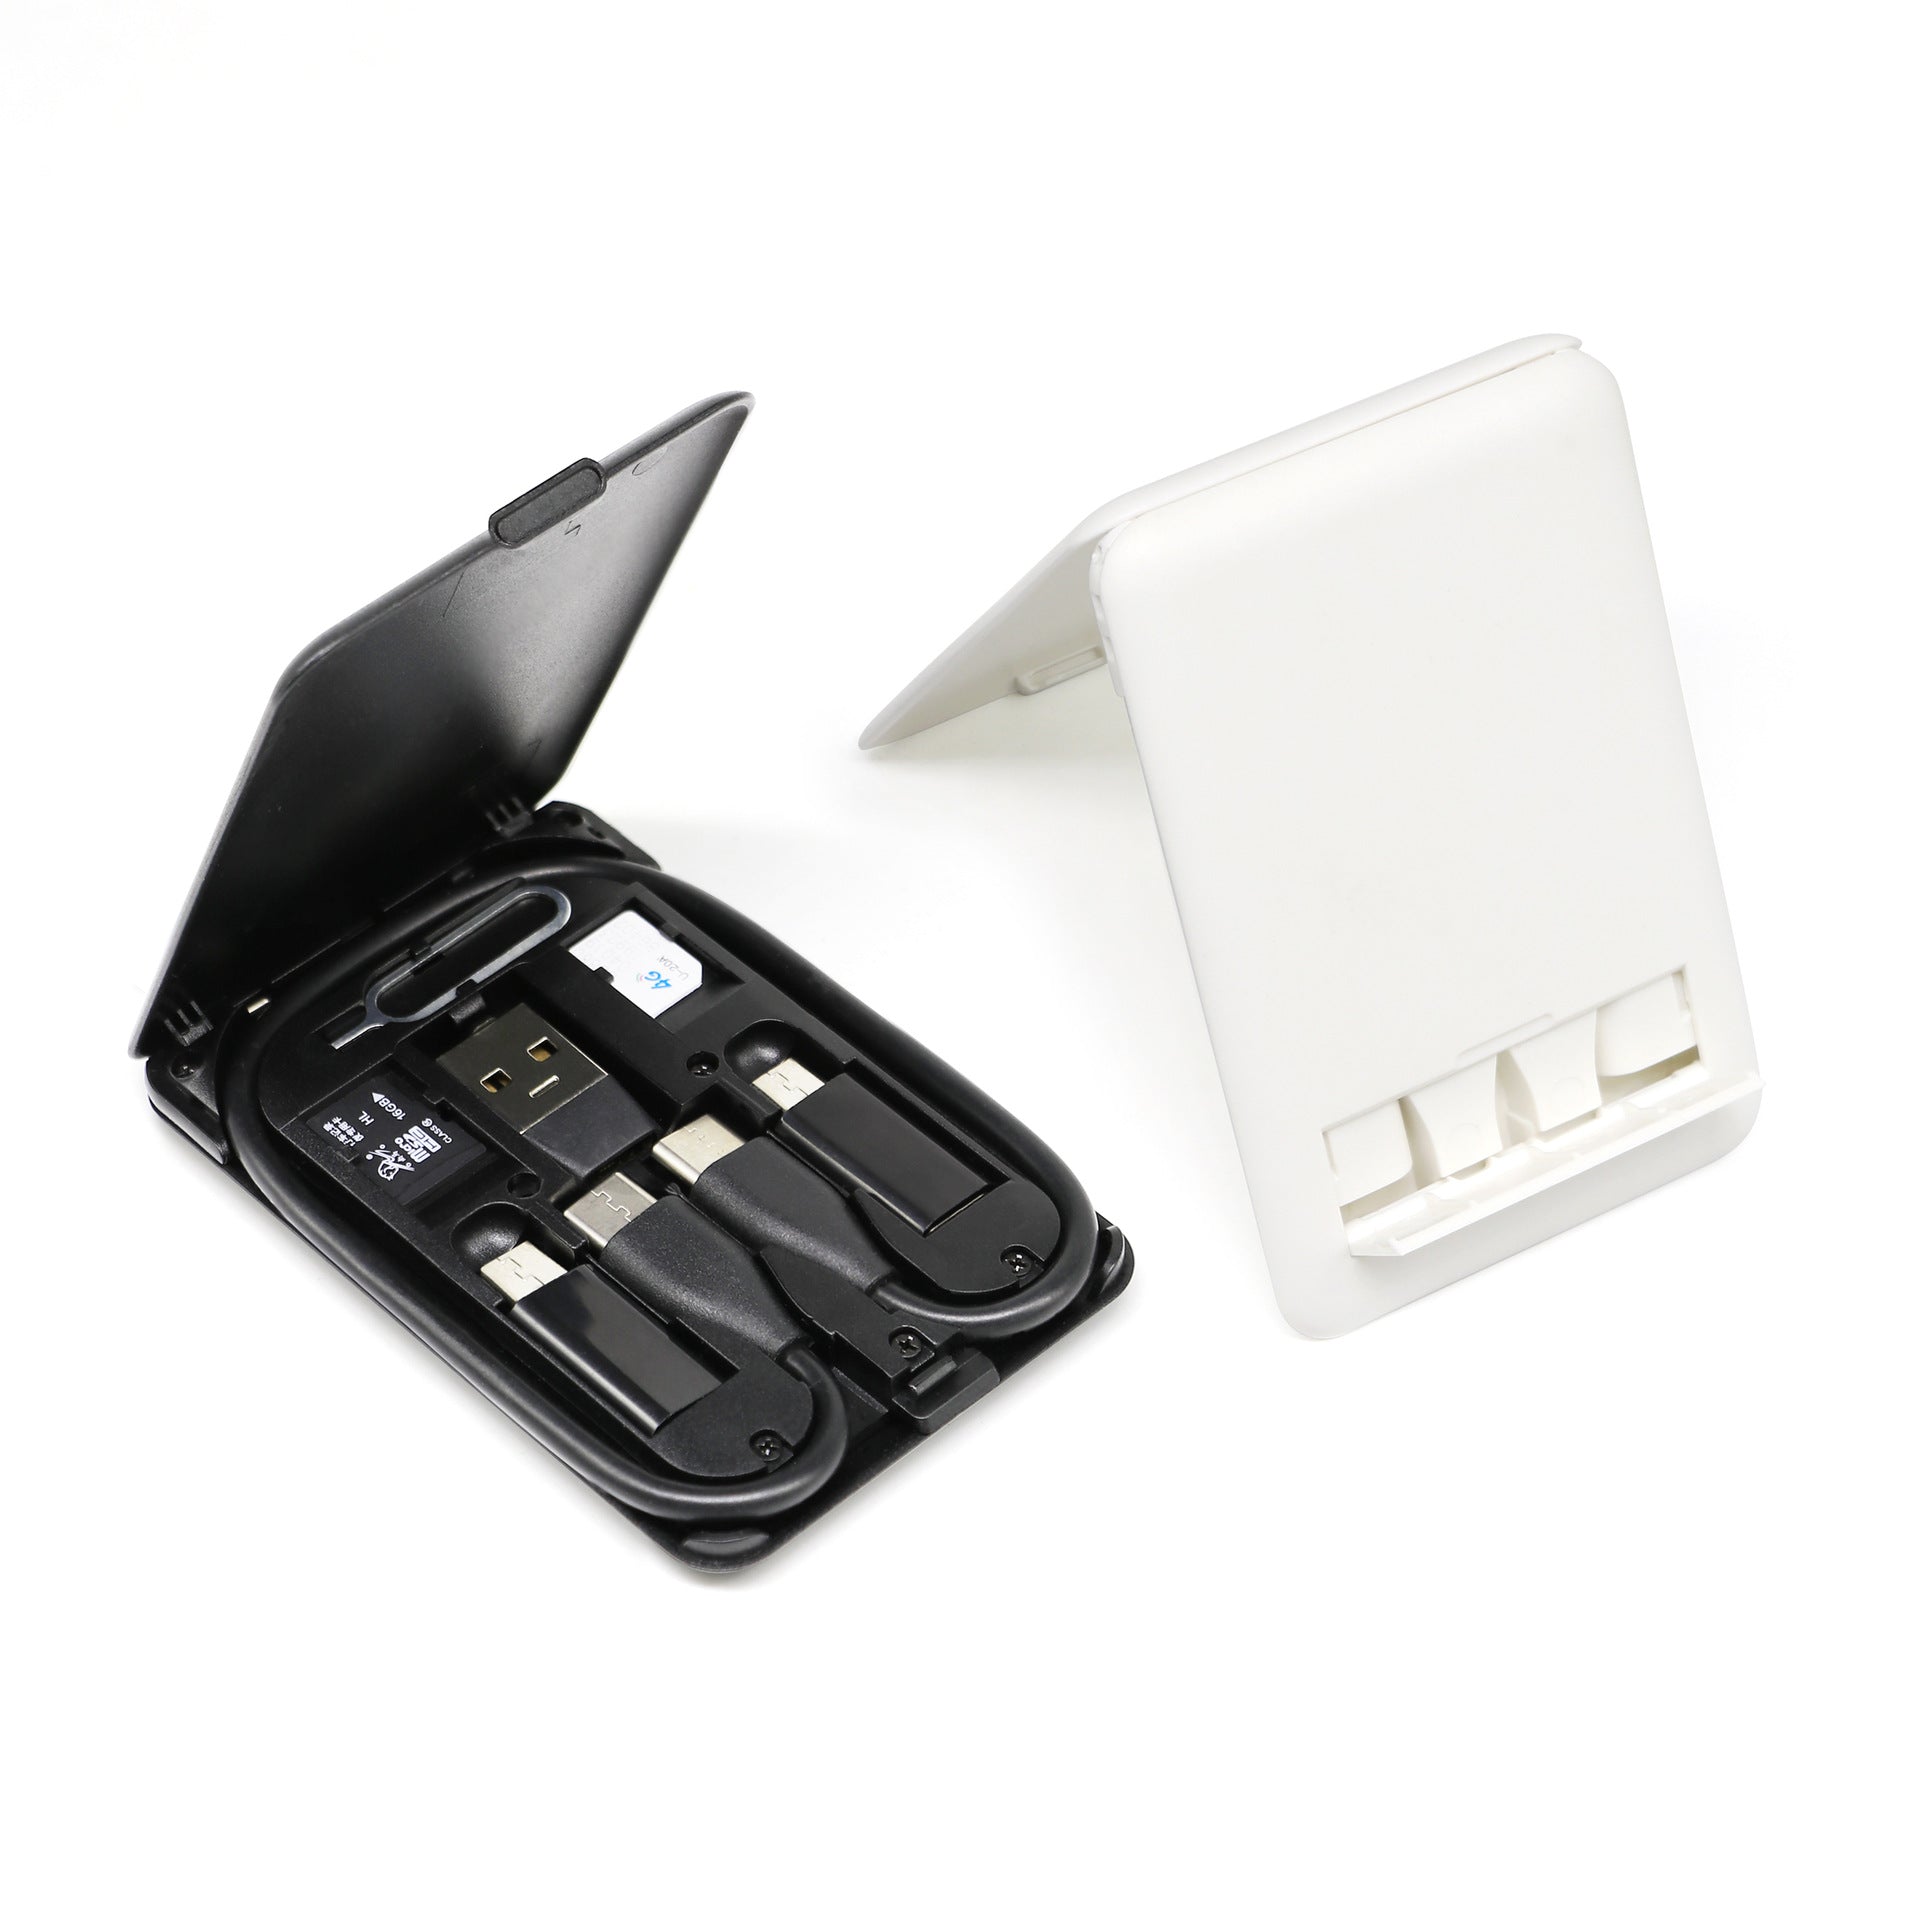 Multi-functional travel survival card , Usb Cables corporate gifts , Apex Gift